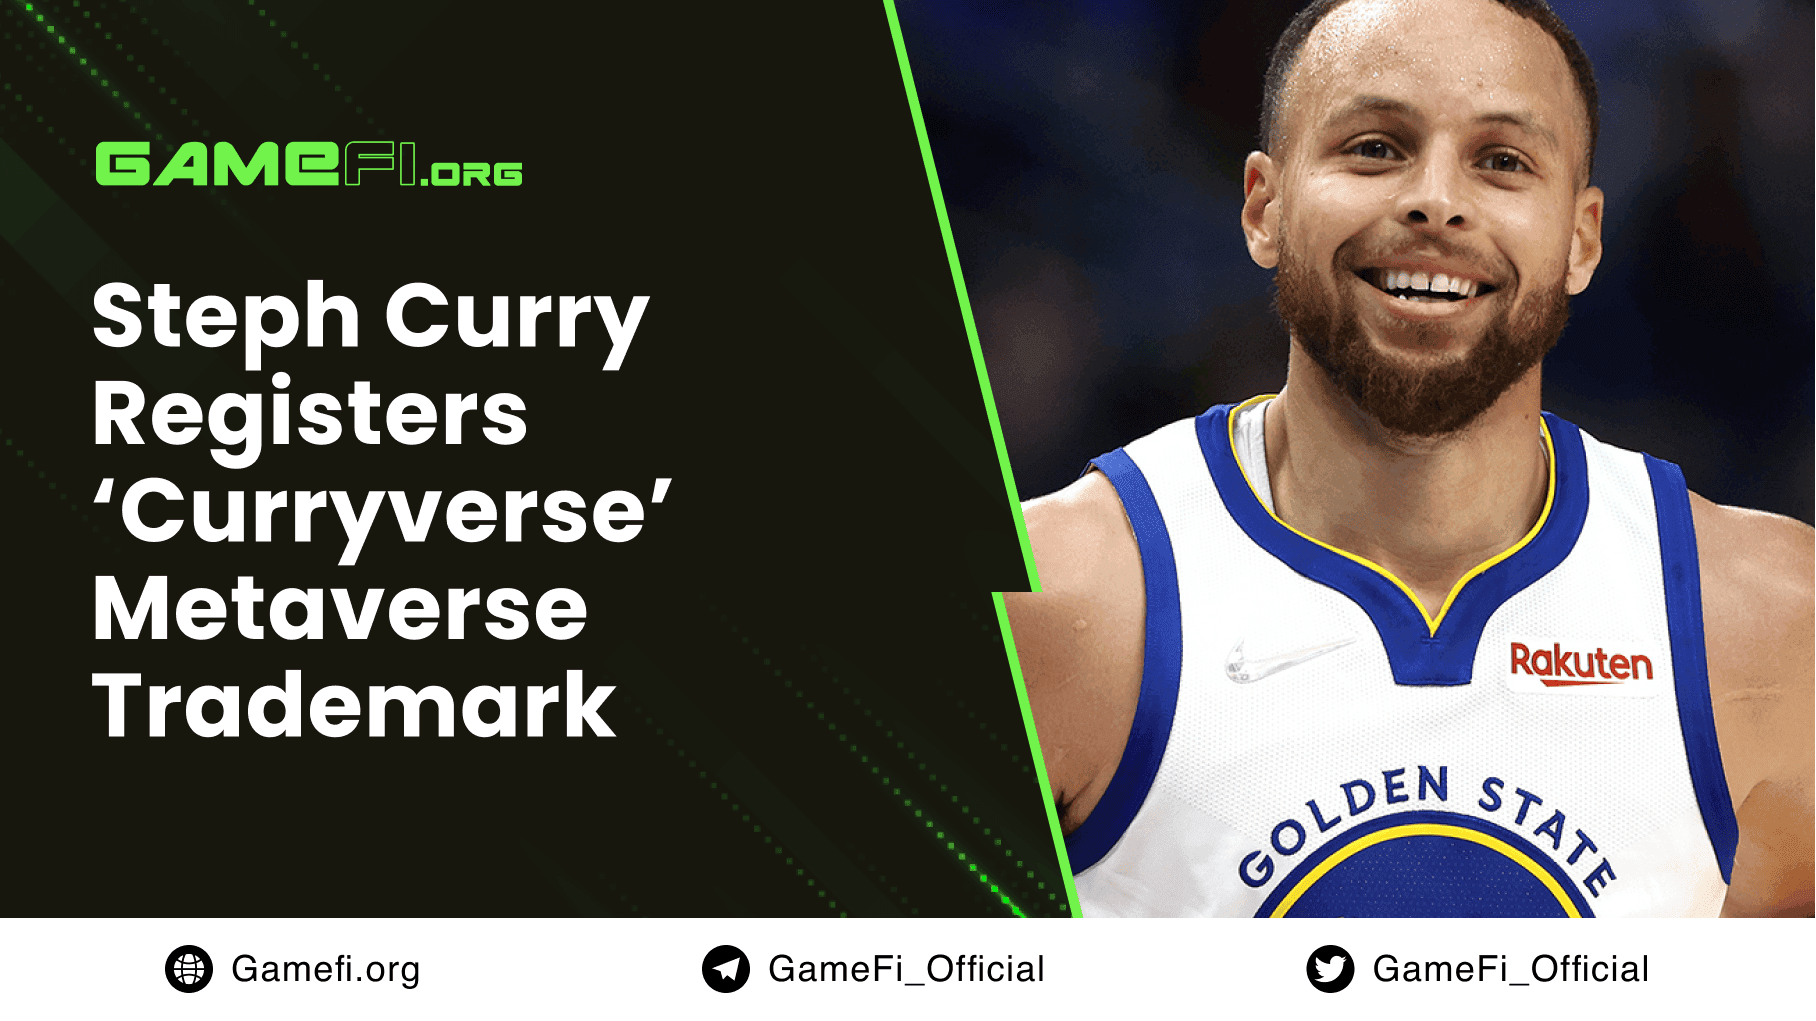 Steph Curry Registers ‘Curryverse’ Metaverse Trademark